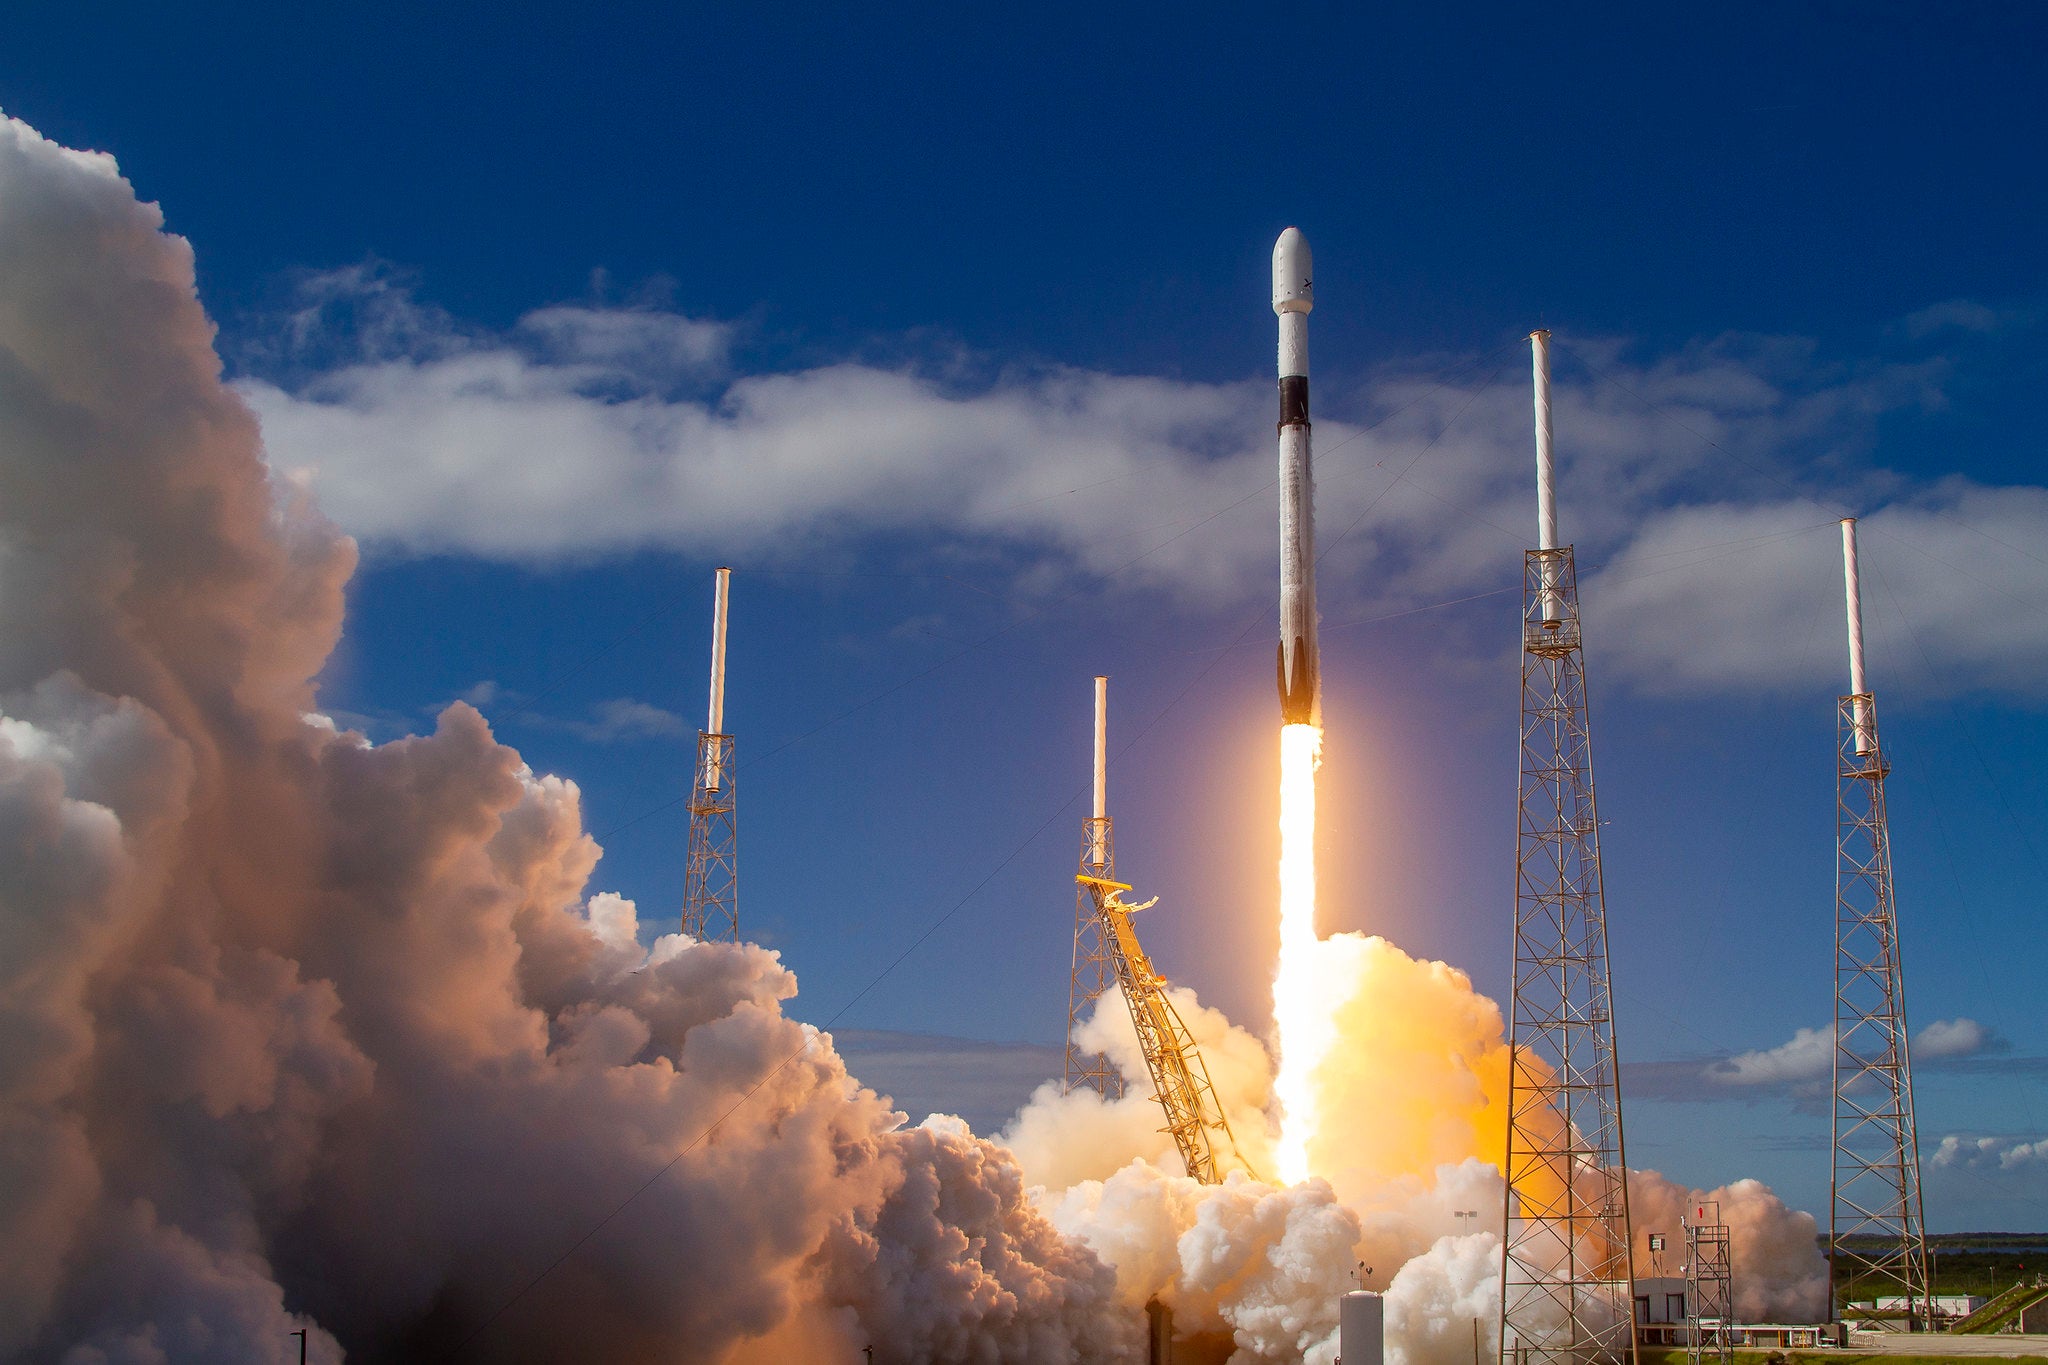 Spaceflight Inc. selects SpaceX's Rideshare Program to launch satellites for multiple companies